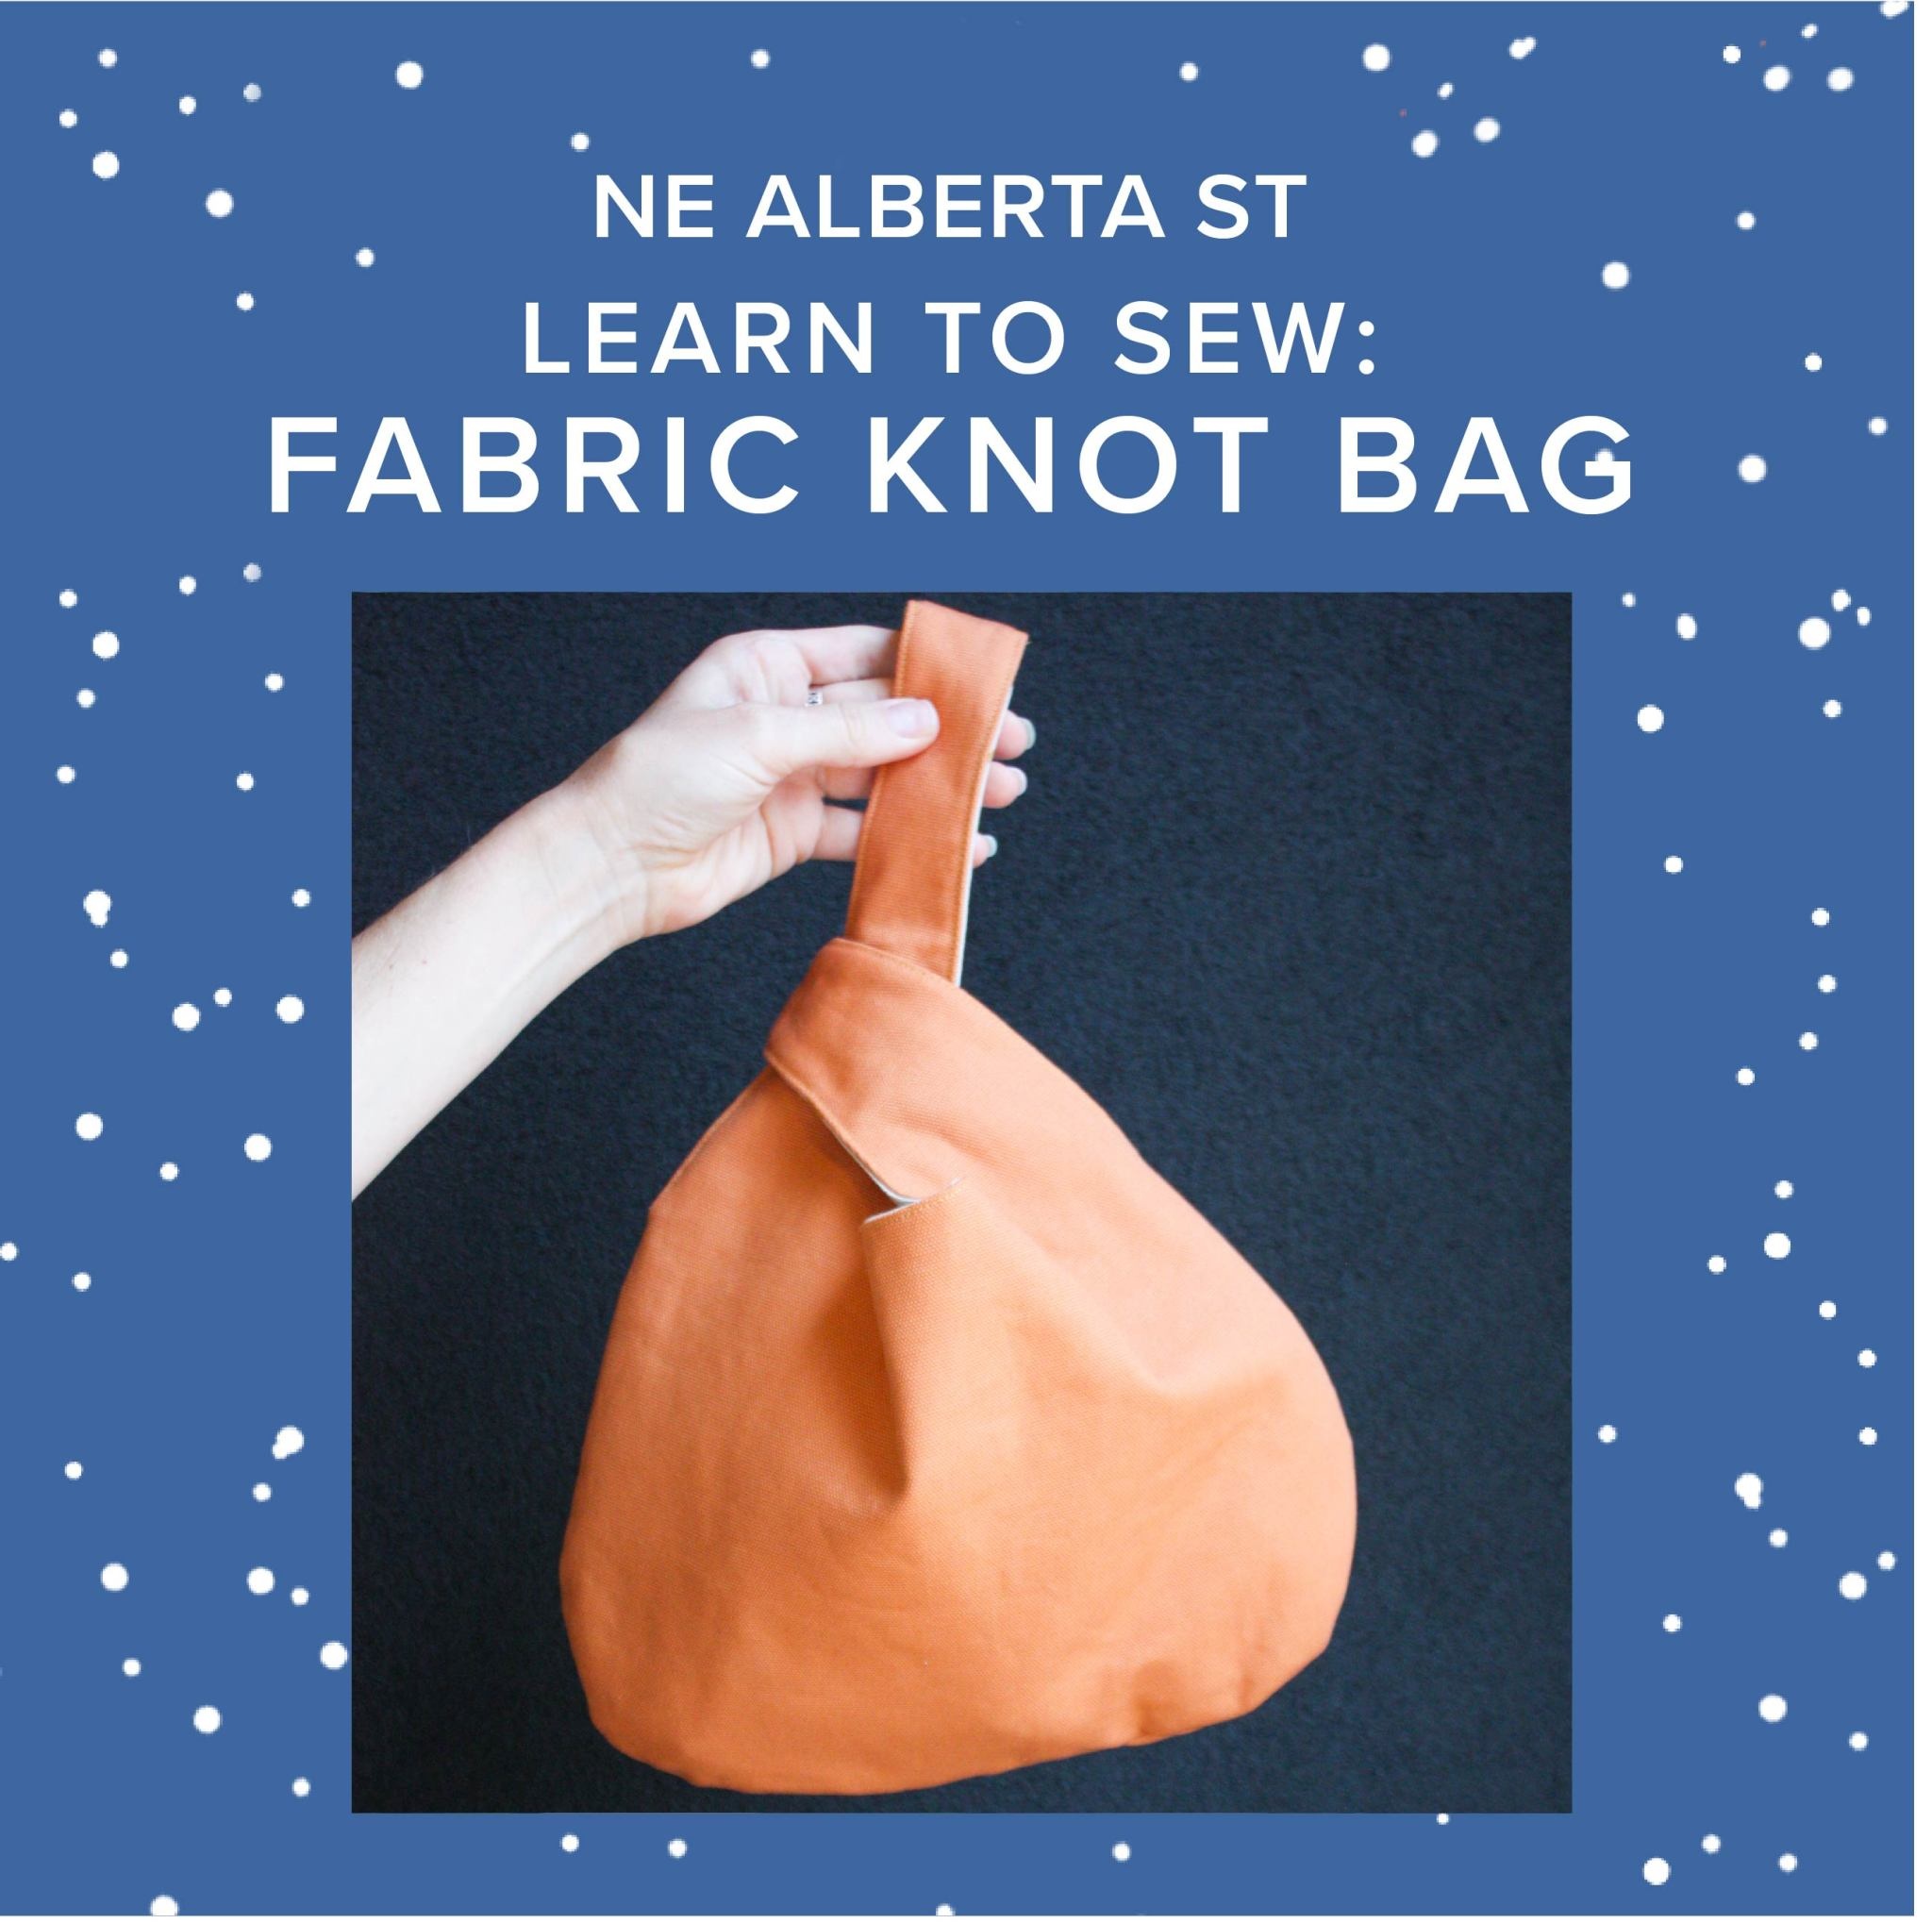 Colleen Connolly Learn to Sew: Fabric Knot Bag, Alberta St Store, 5:30pm-8:30pm